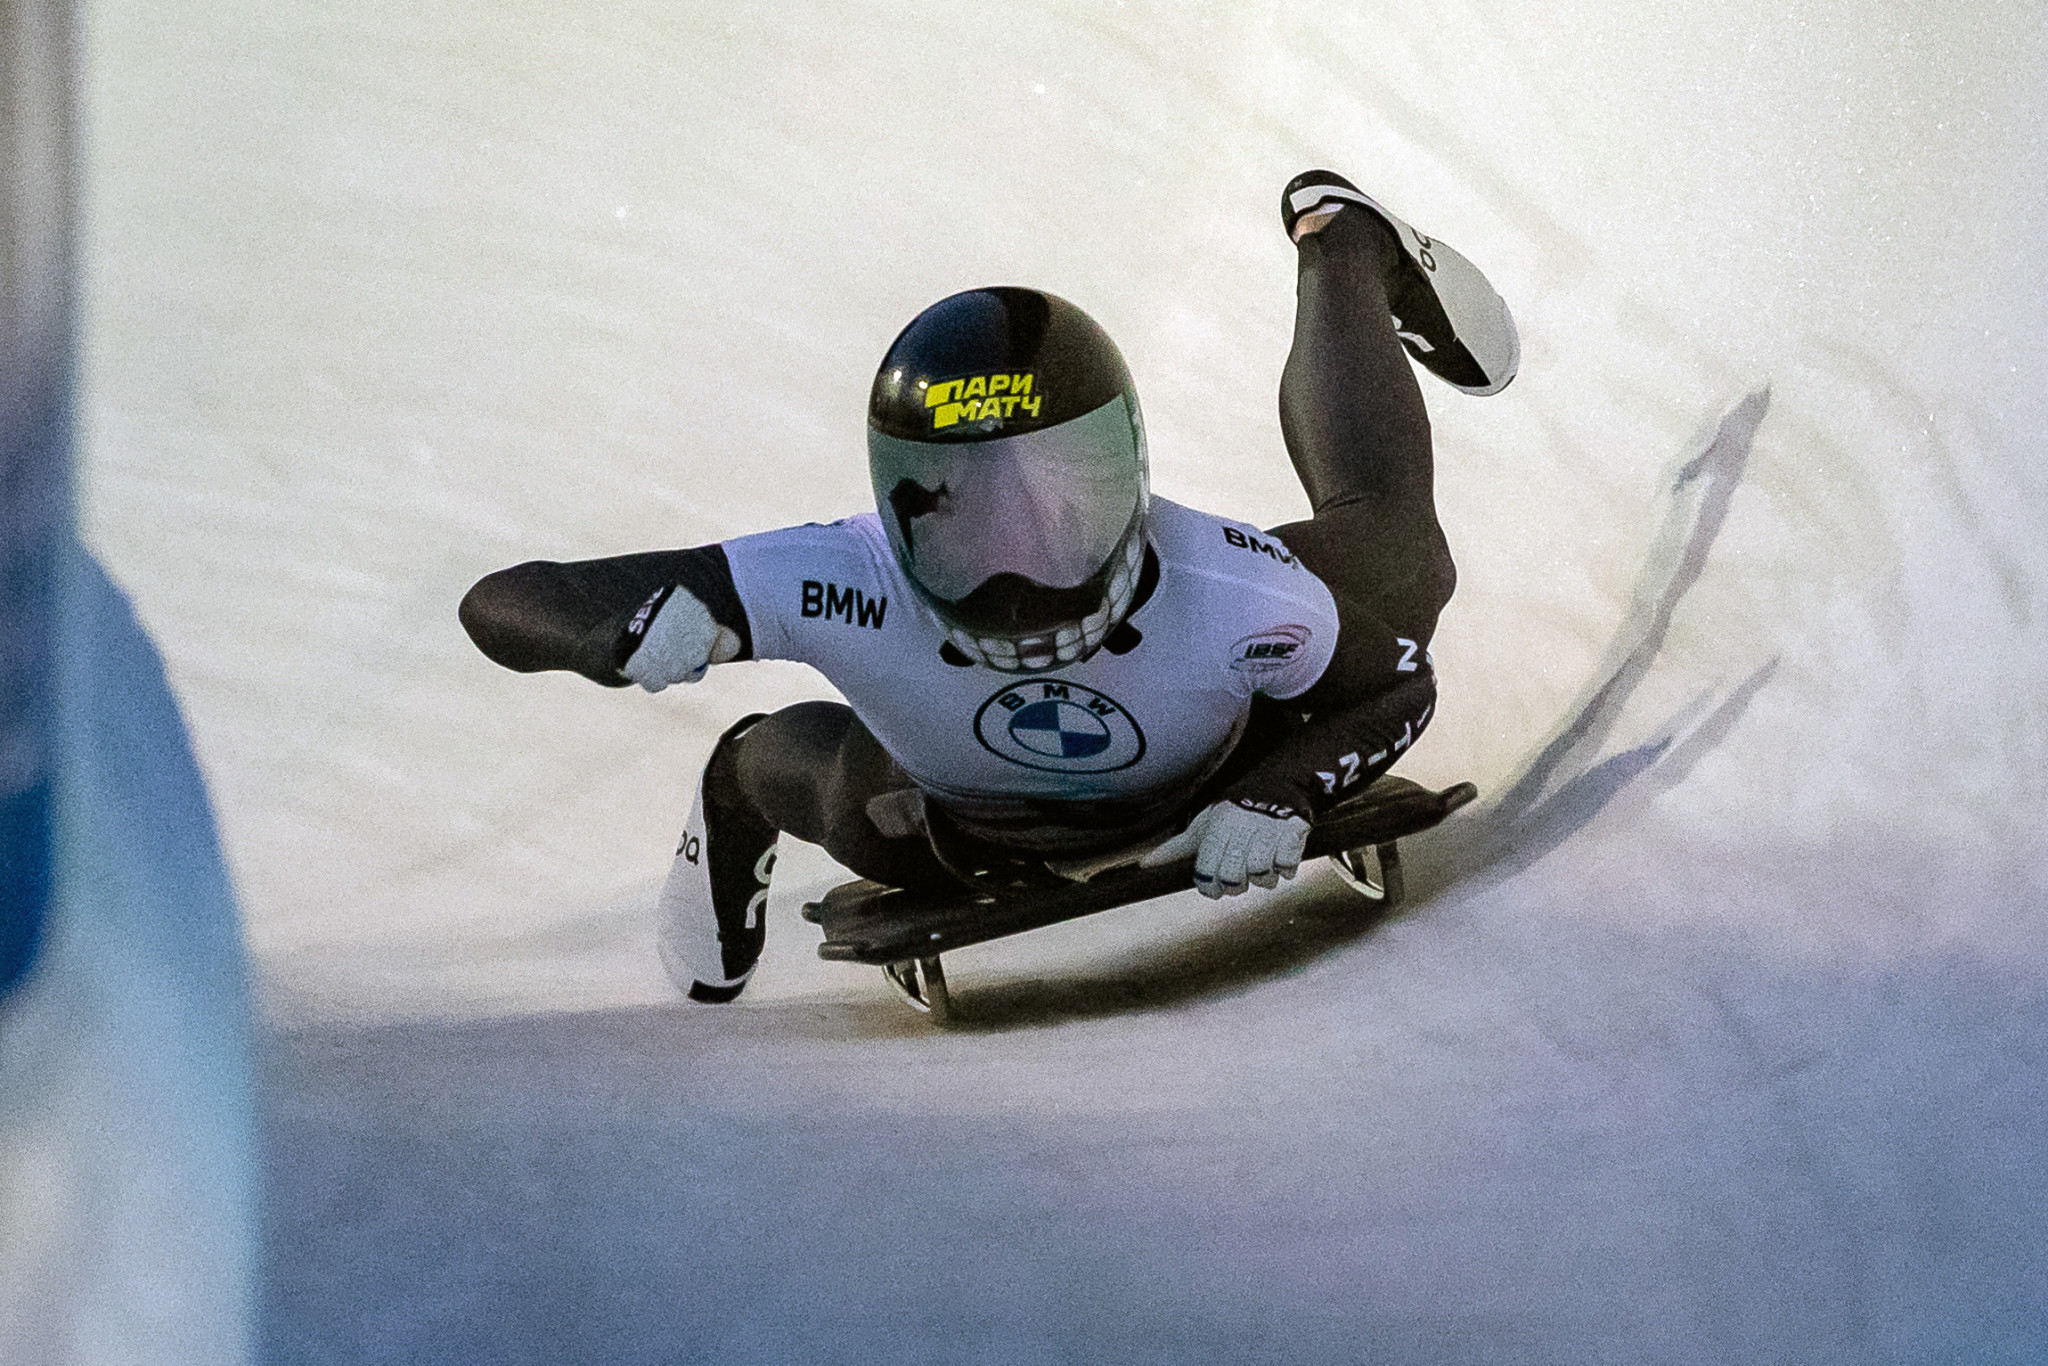 Russia’s Elena Nikitina is seeking a third consecutive women's skeleton World Cup win ©Getty Images